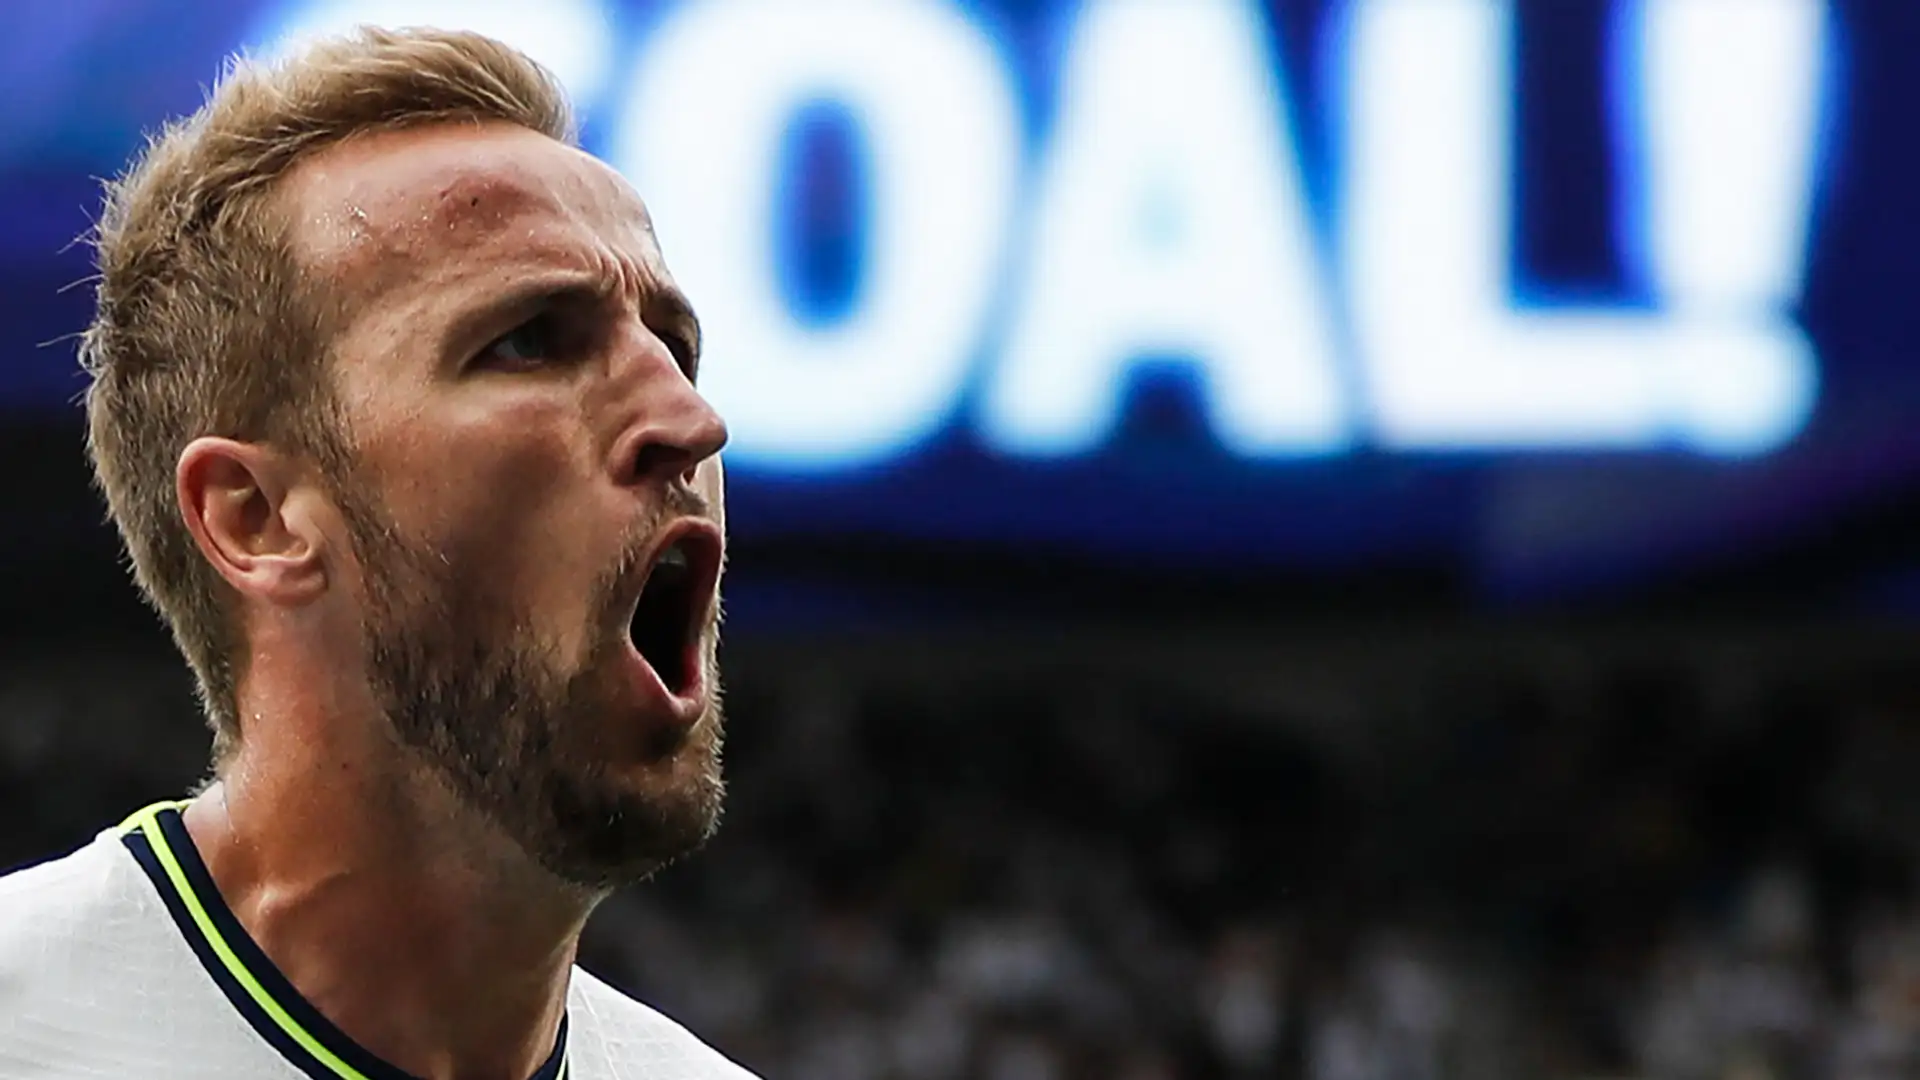 VIDEO: Harry Kane is still Spurs! Bayern Munich striker refuses to sign Arsenal shirt as England star asks ‘what is that?’